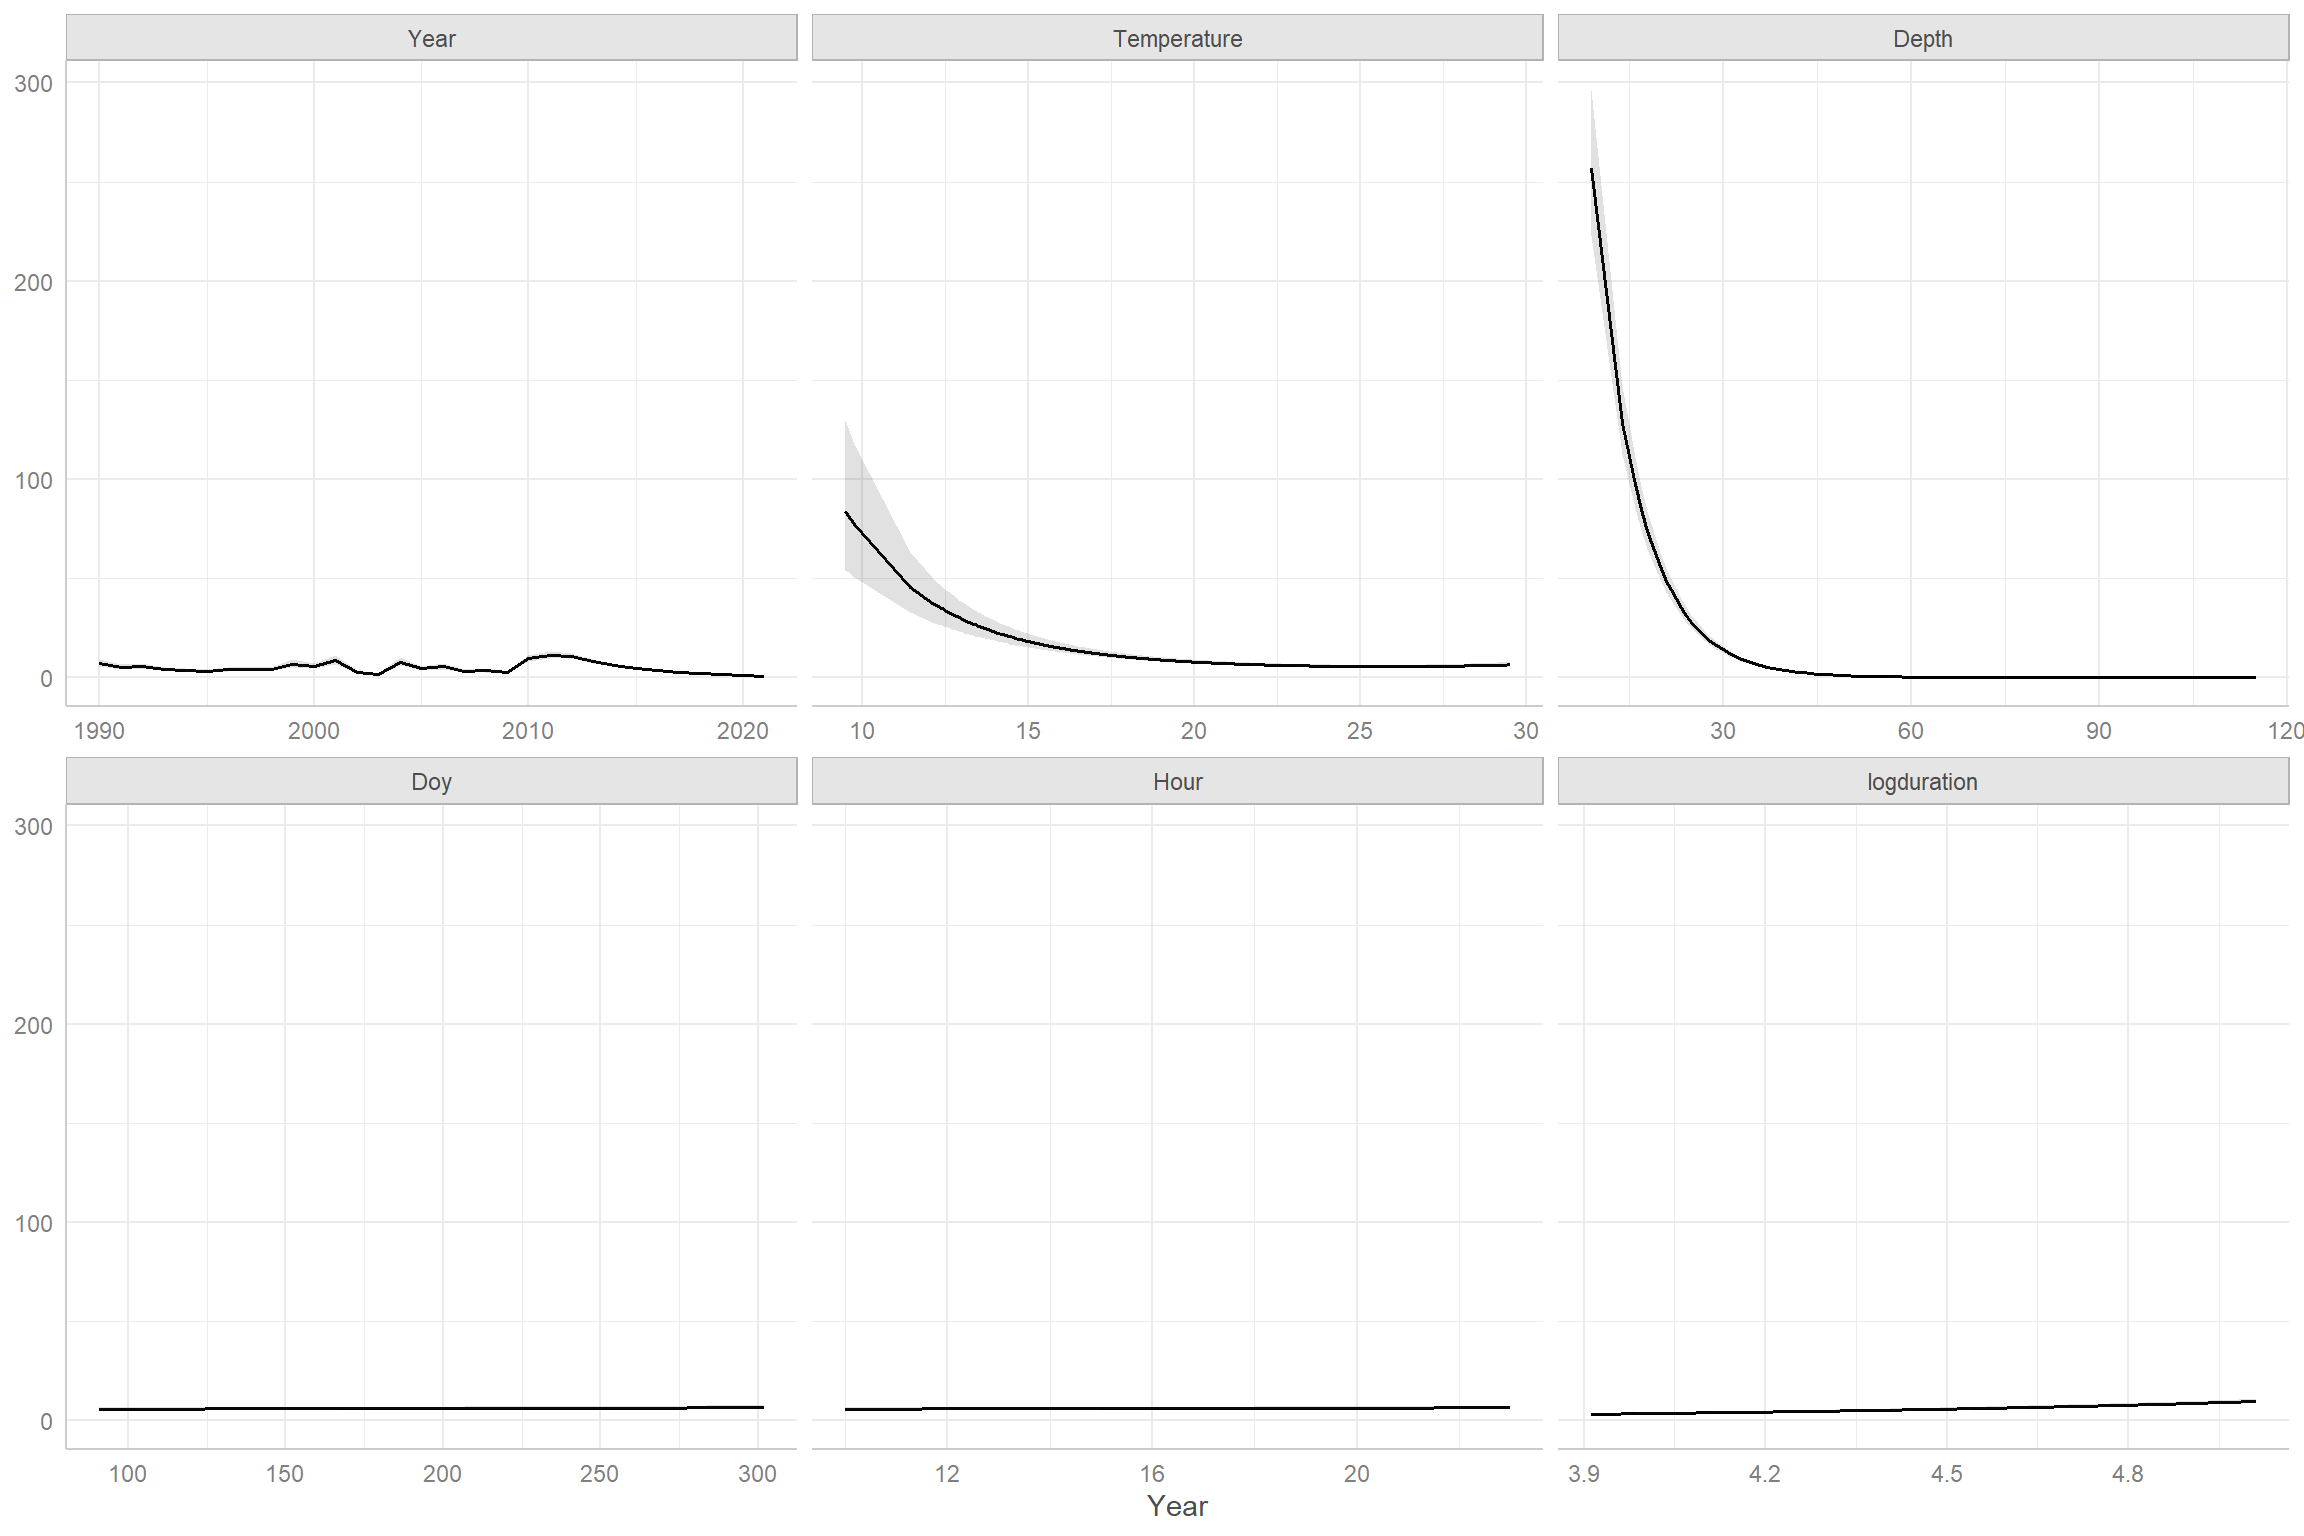 Effect plots for the Negative Binomial regression model fit to the black sea bass data.